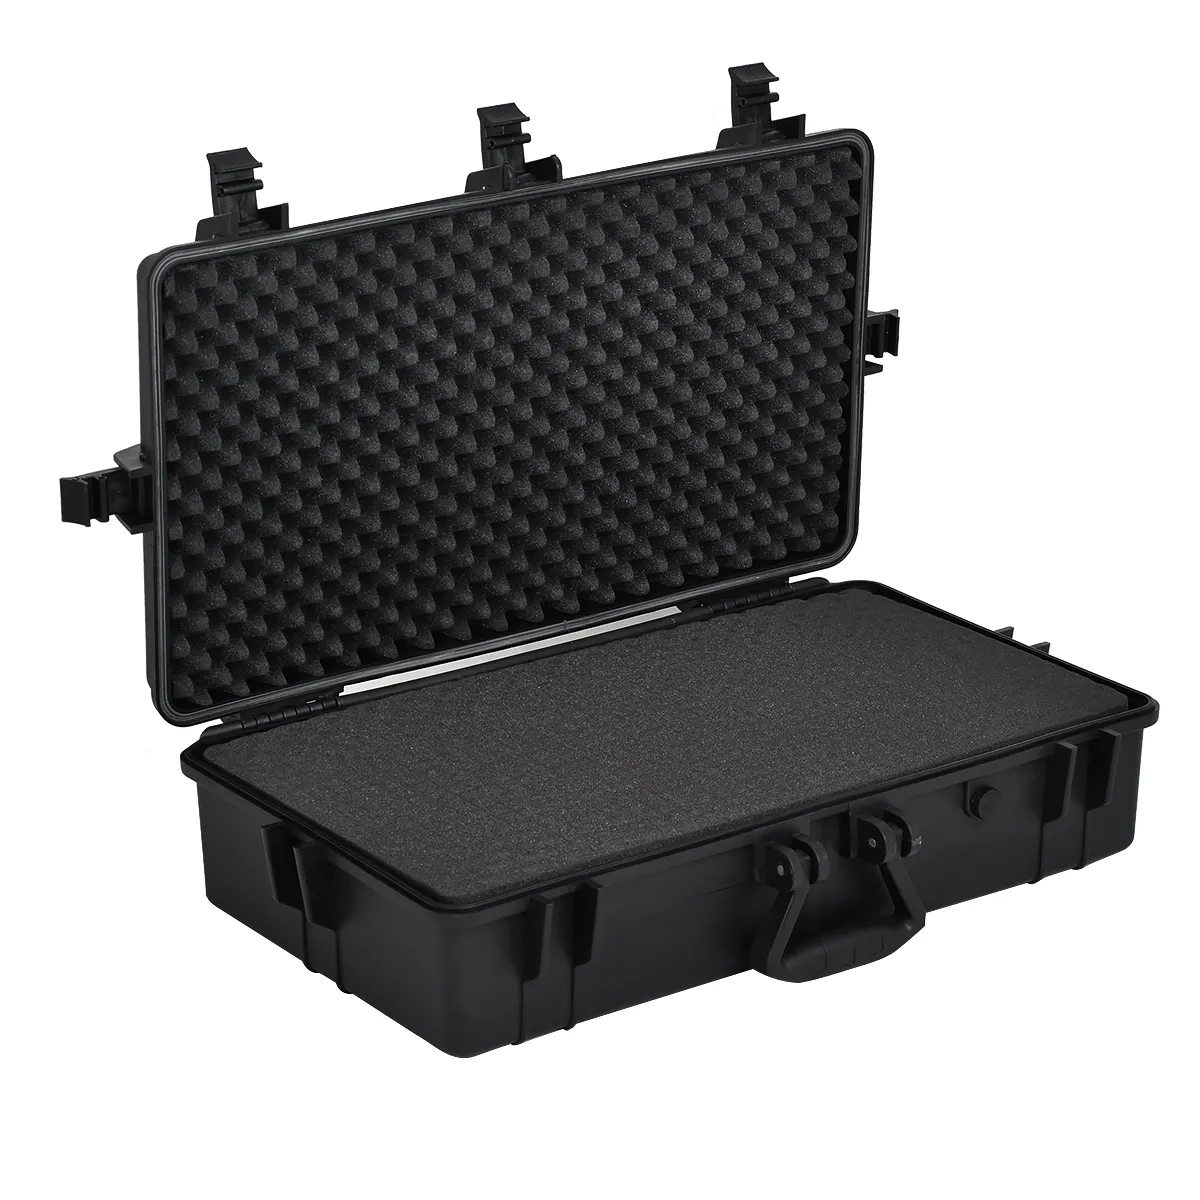 High Quality Hard Case Plastic Tool Box with Handle Waterproof and Shockproof for Safe Storage and Display